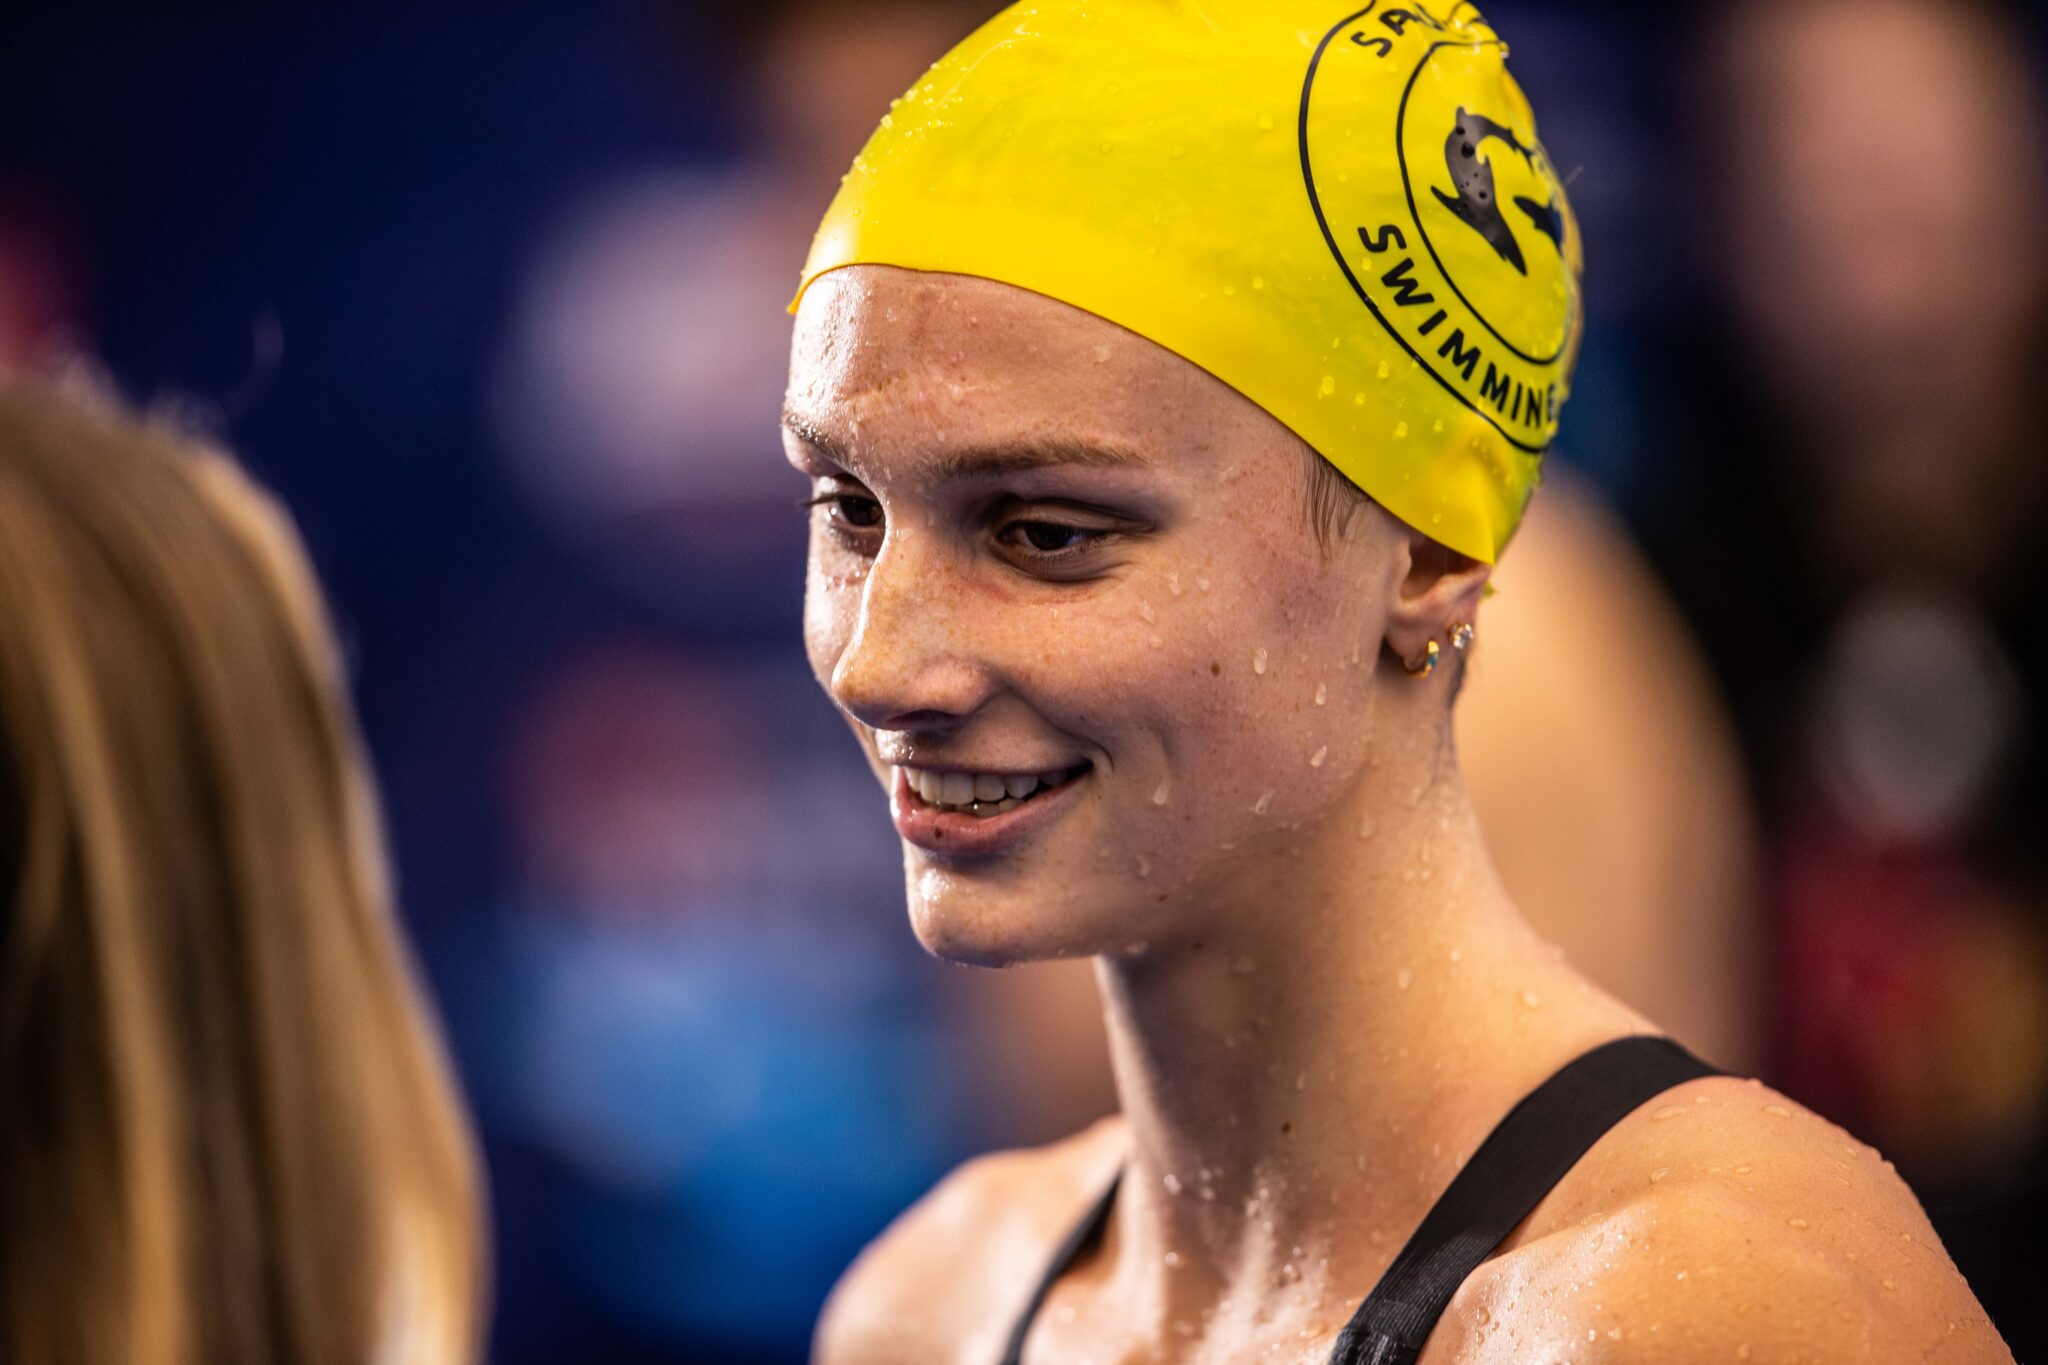 17-Year-Old Canadian Olympic & Paralympic Trials Swimmer Summer McIntosh Breaks World Record in 400 IM and Secures Spots on Canadian Olympic Team